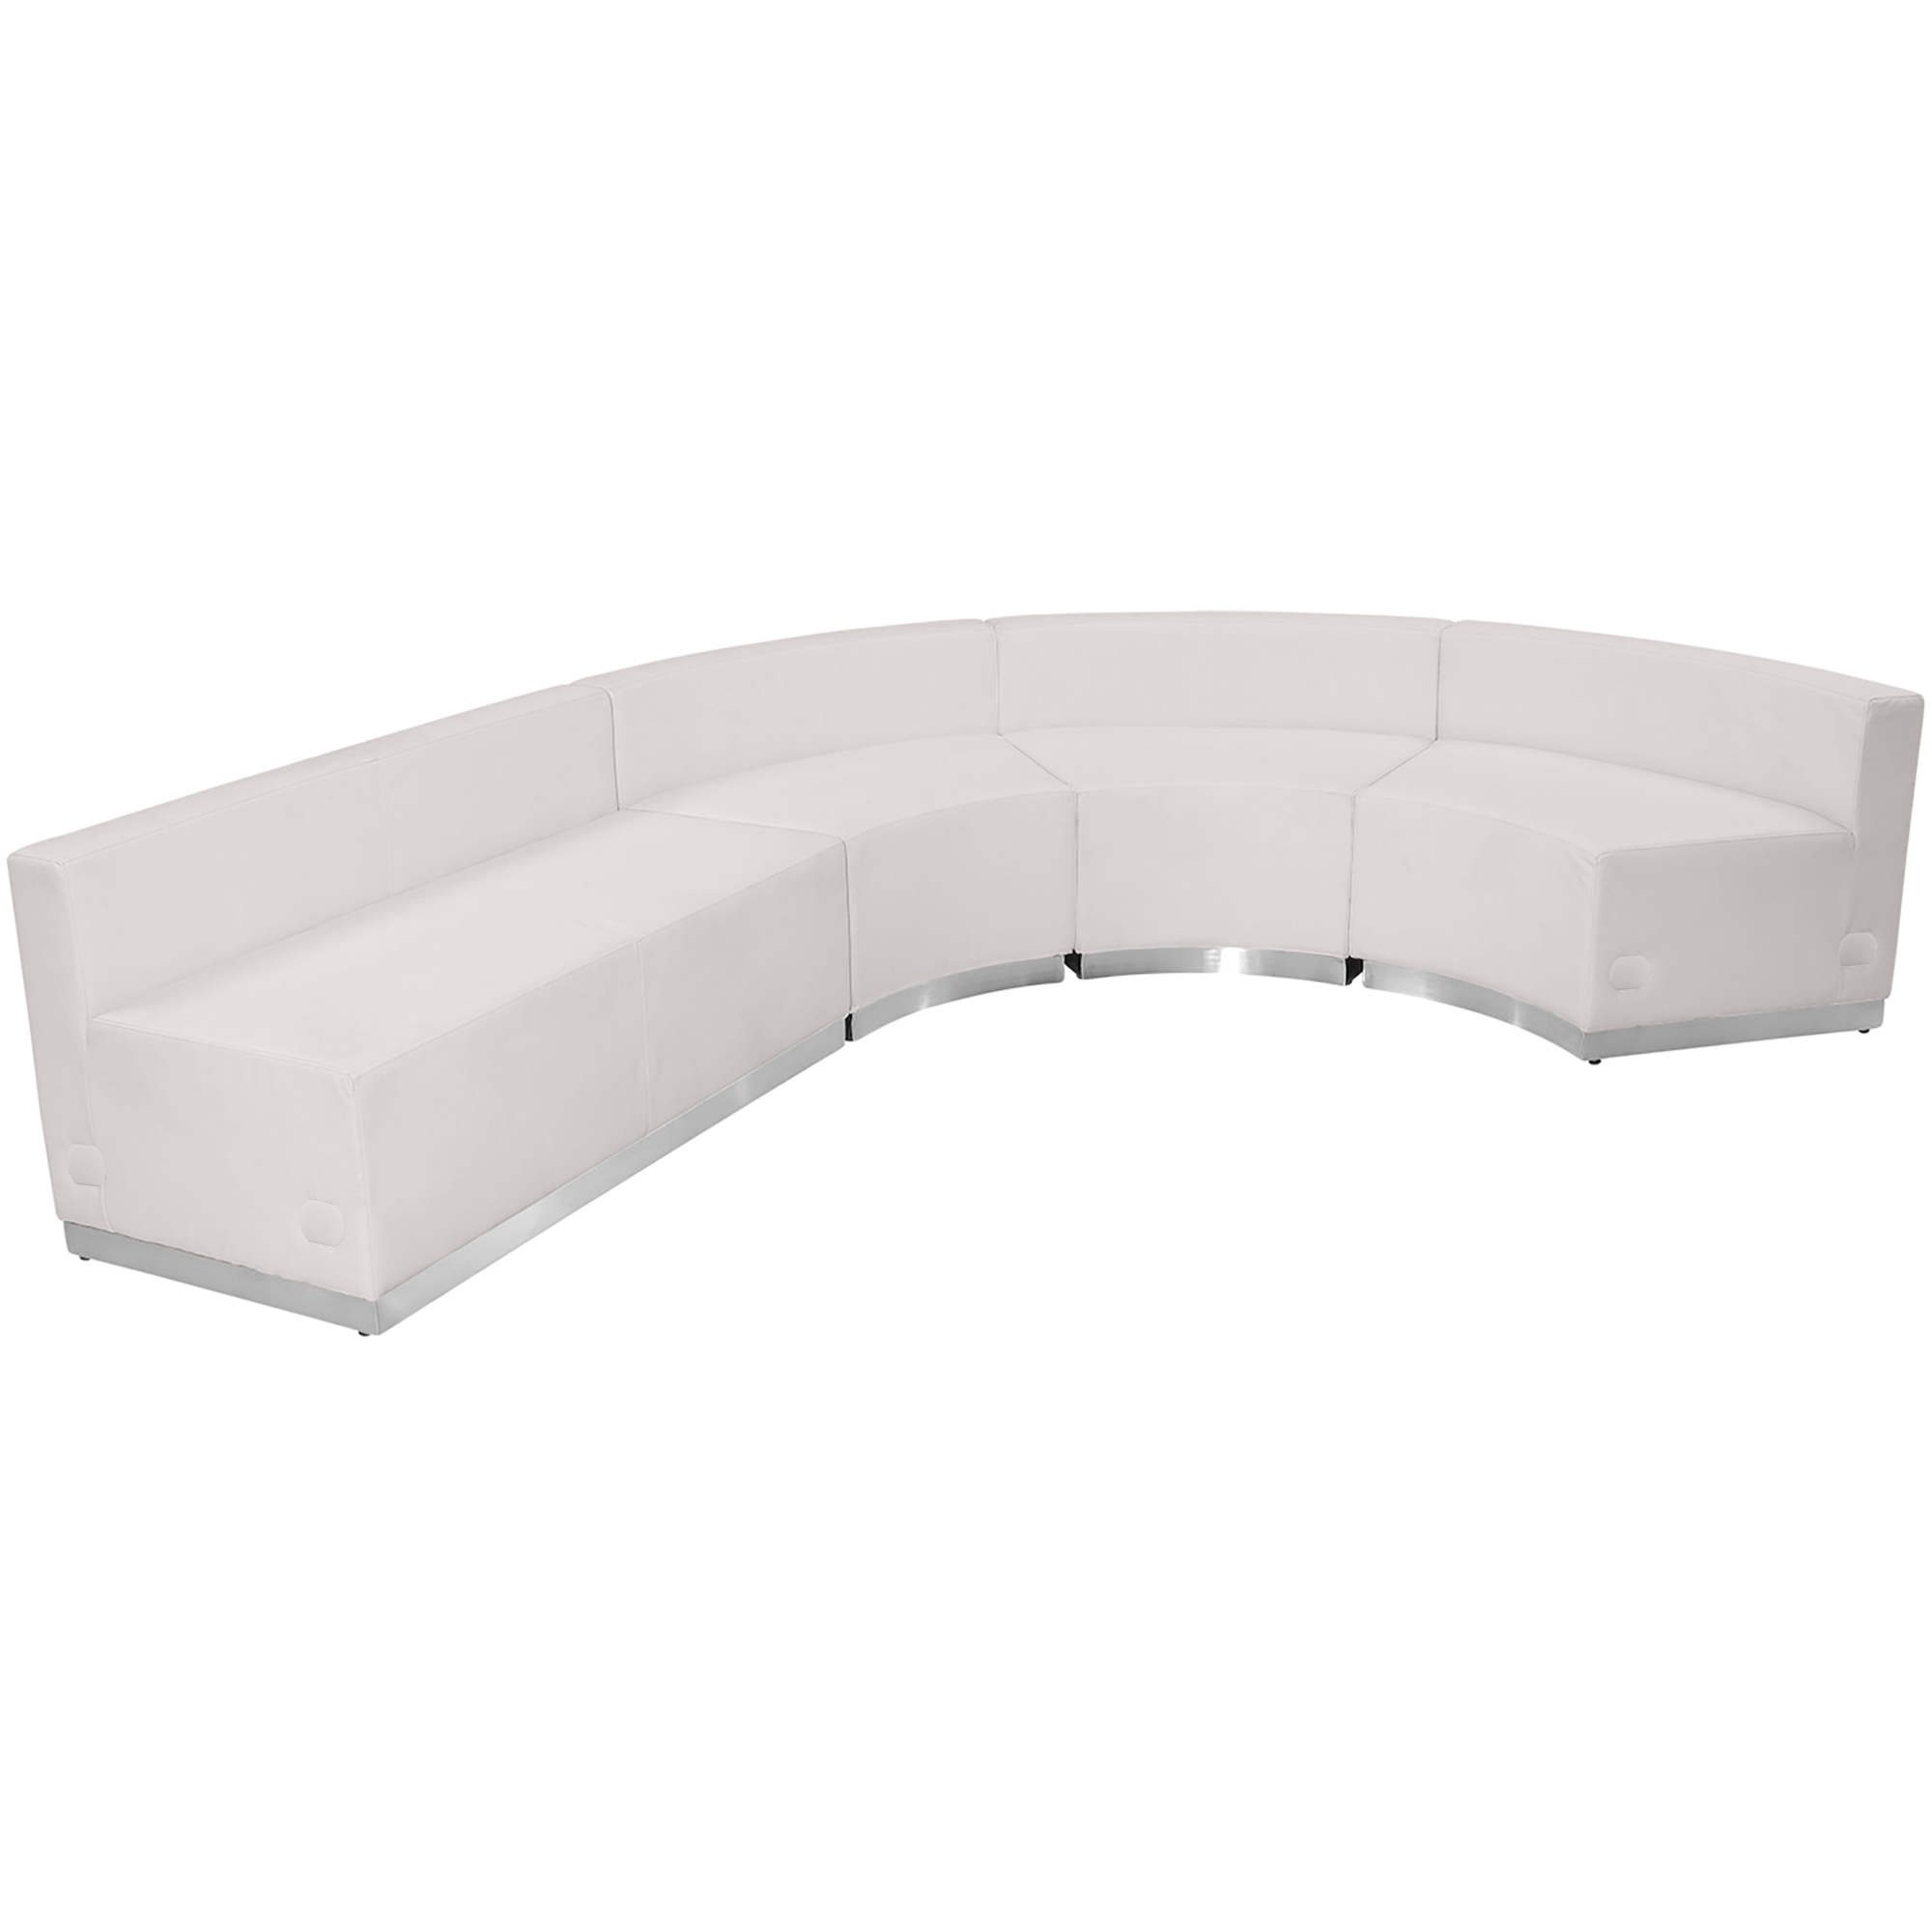 Flash Furniture, 4 PC White LeatherSoft Reception Configuration, Primary Color White, Included (qty.) 4, Model ZB803760SWH